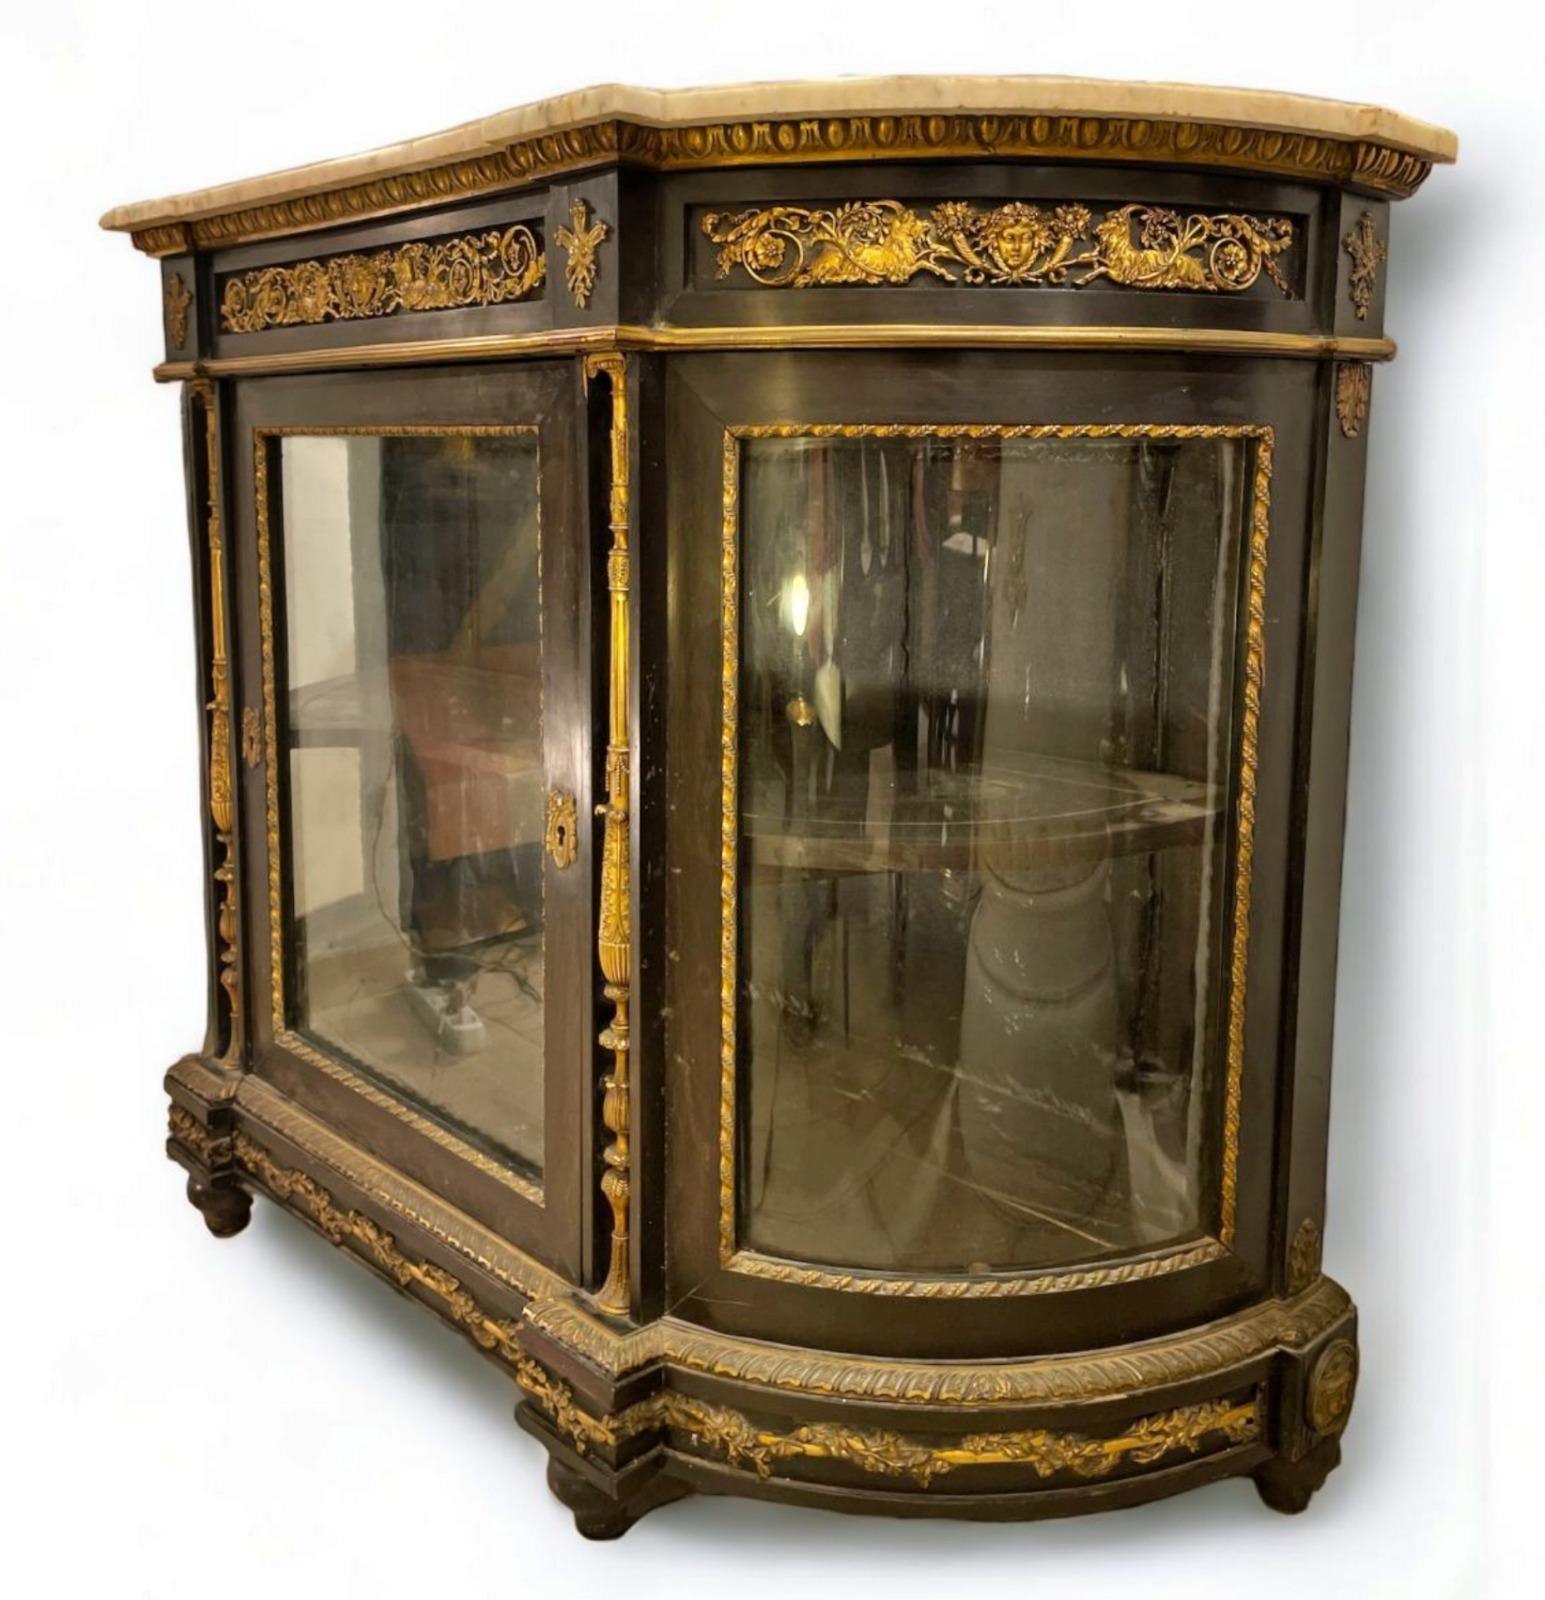 Important Jeune Belfort (1813) Sideboard, France, Napoleon III 19th Century

Sideboard, France, Napoleon III era
101 x 49 x 139cm
with single central glass door. Ebony plated over oak. Gilded and finely chiselled bronze fittings, with white marble